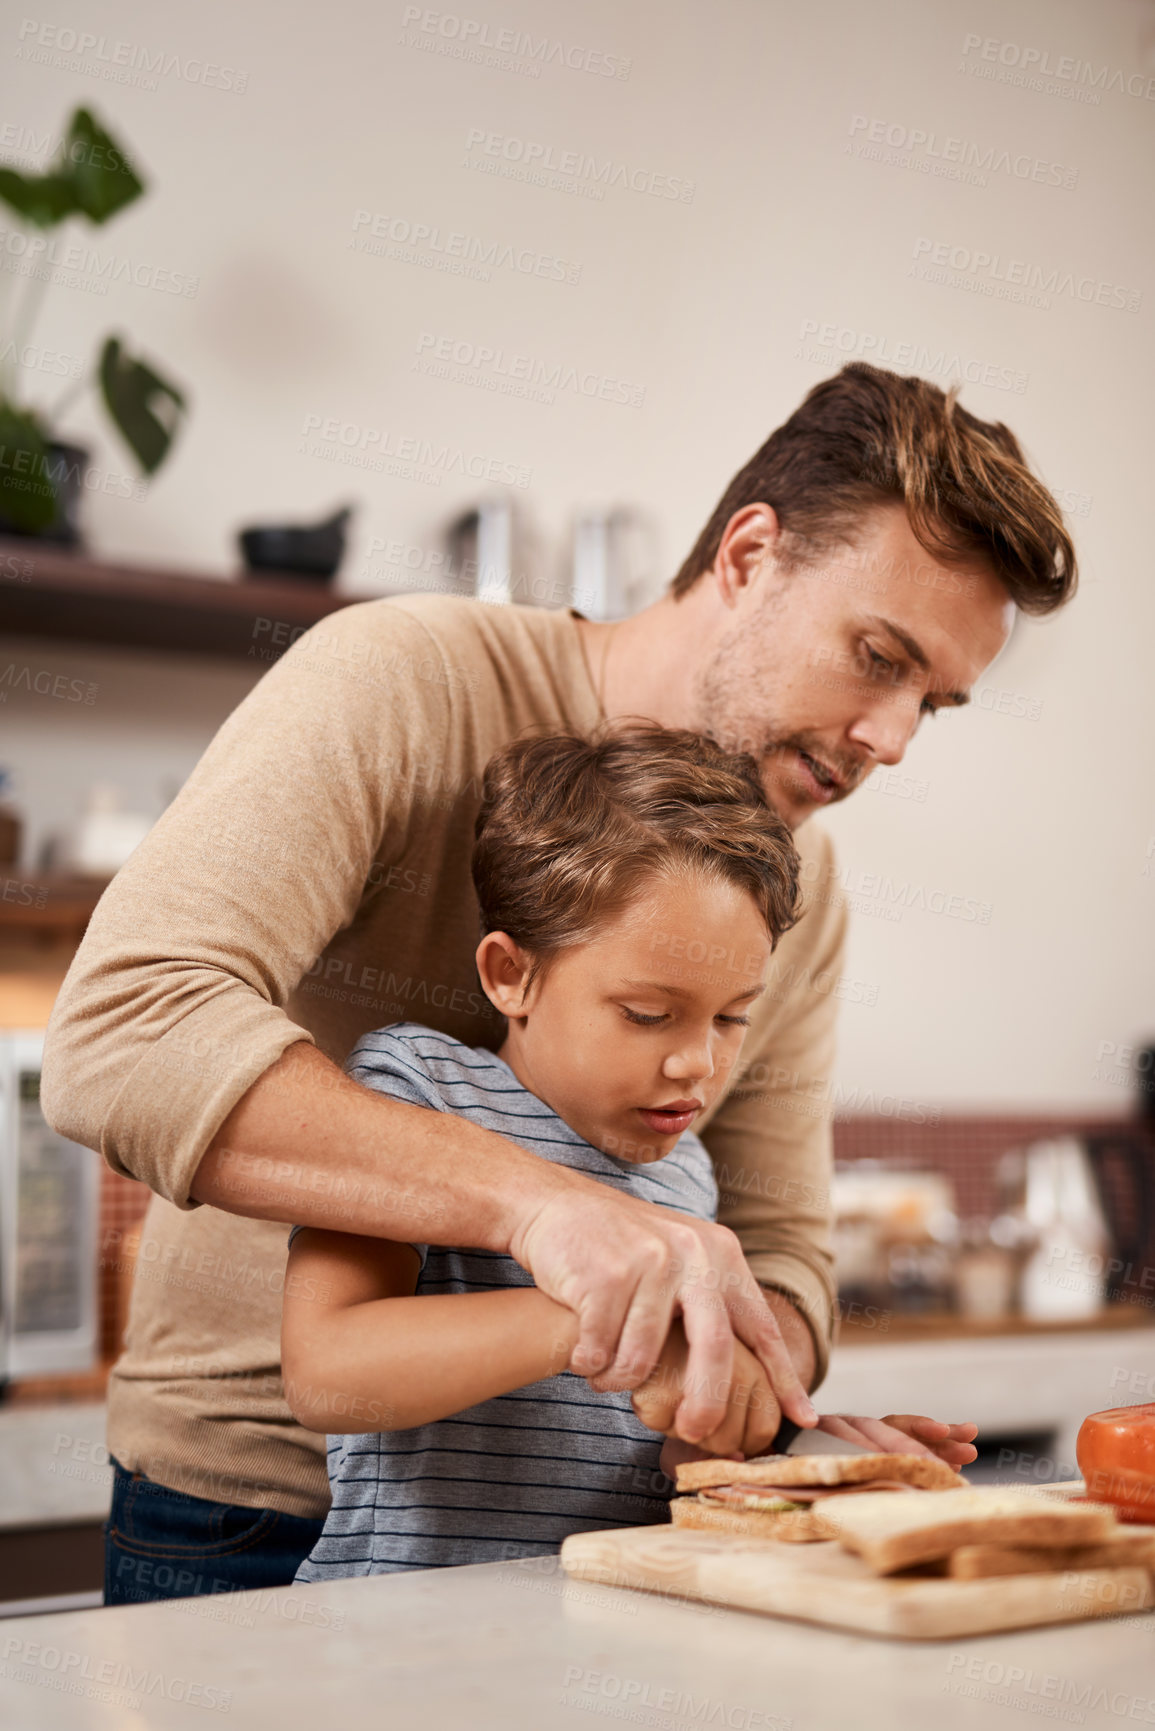 Buy stock photo Shot of a young boy making a sandwich with the help of his father